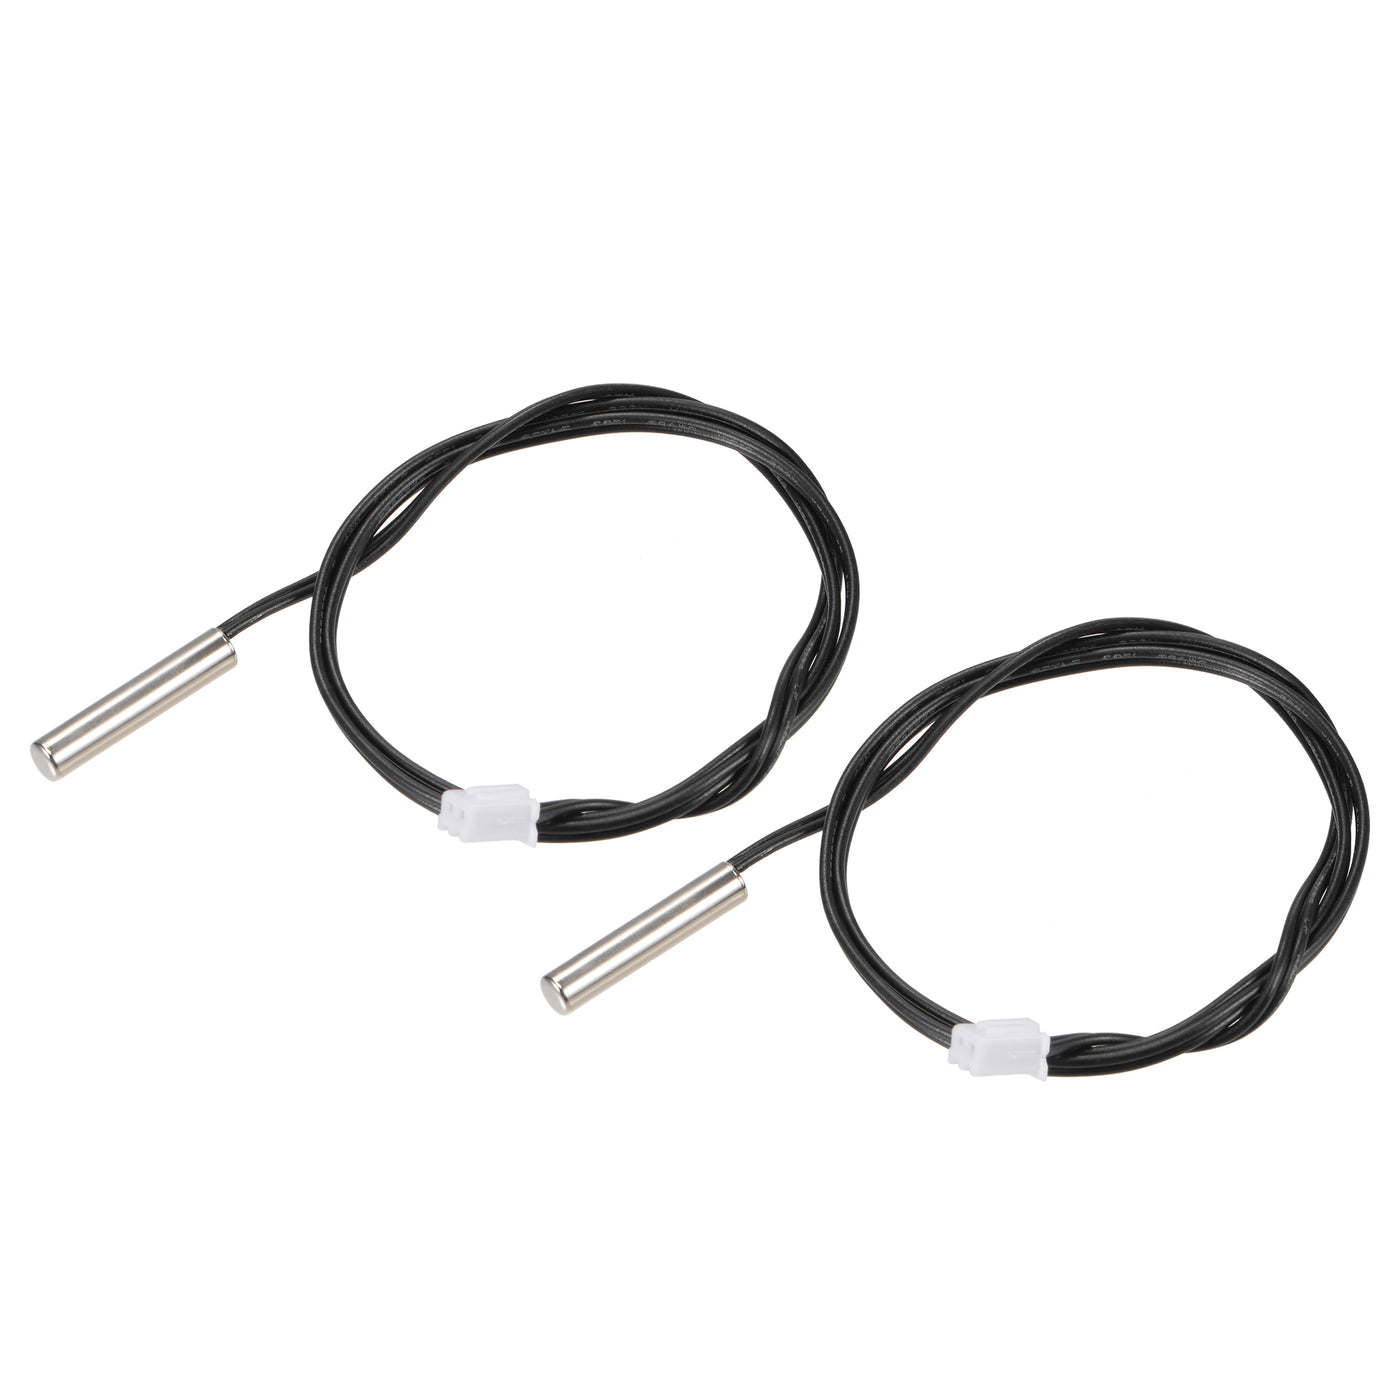 uxcell Uxcell 2pcs 50K Temperature Sensor Probe, Stainless Steel NTC Thermal Sensor Probe 50cm Digital Thermometer Extension Cable